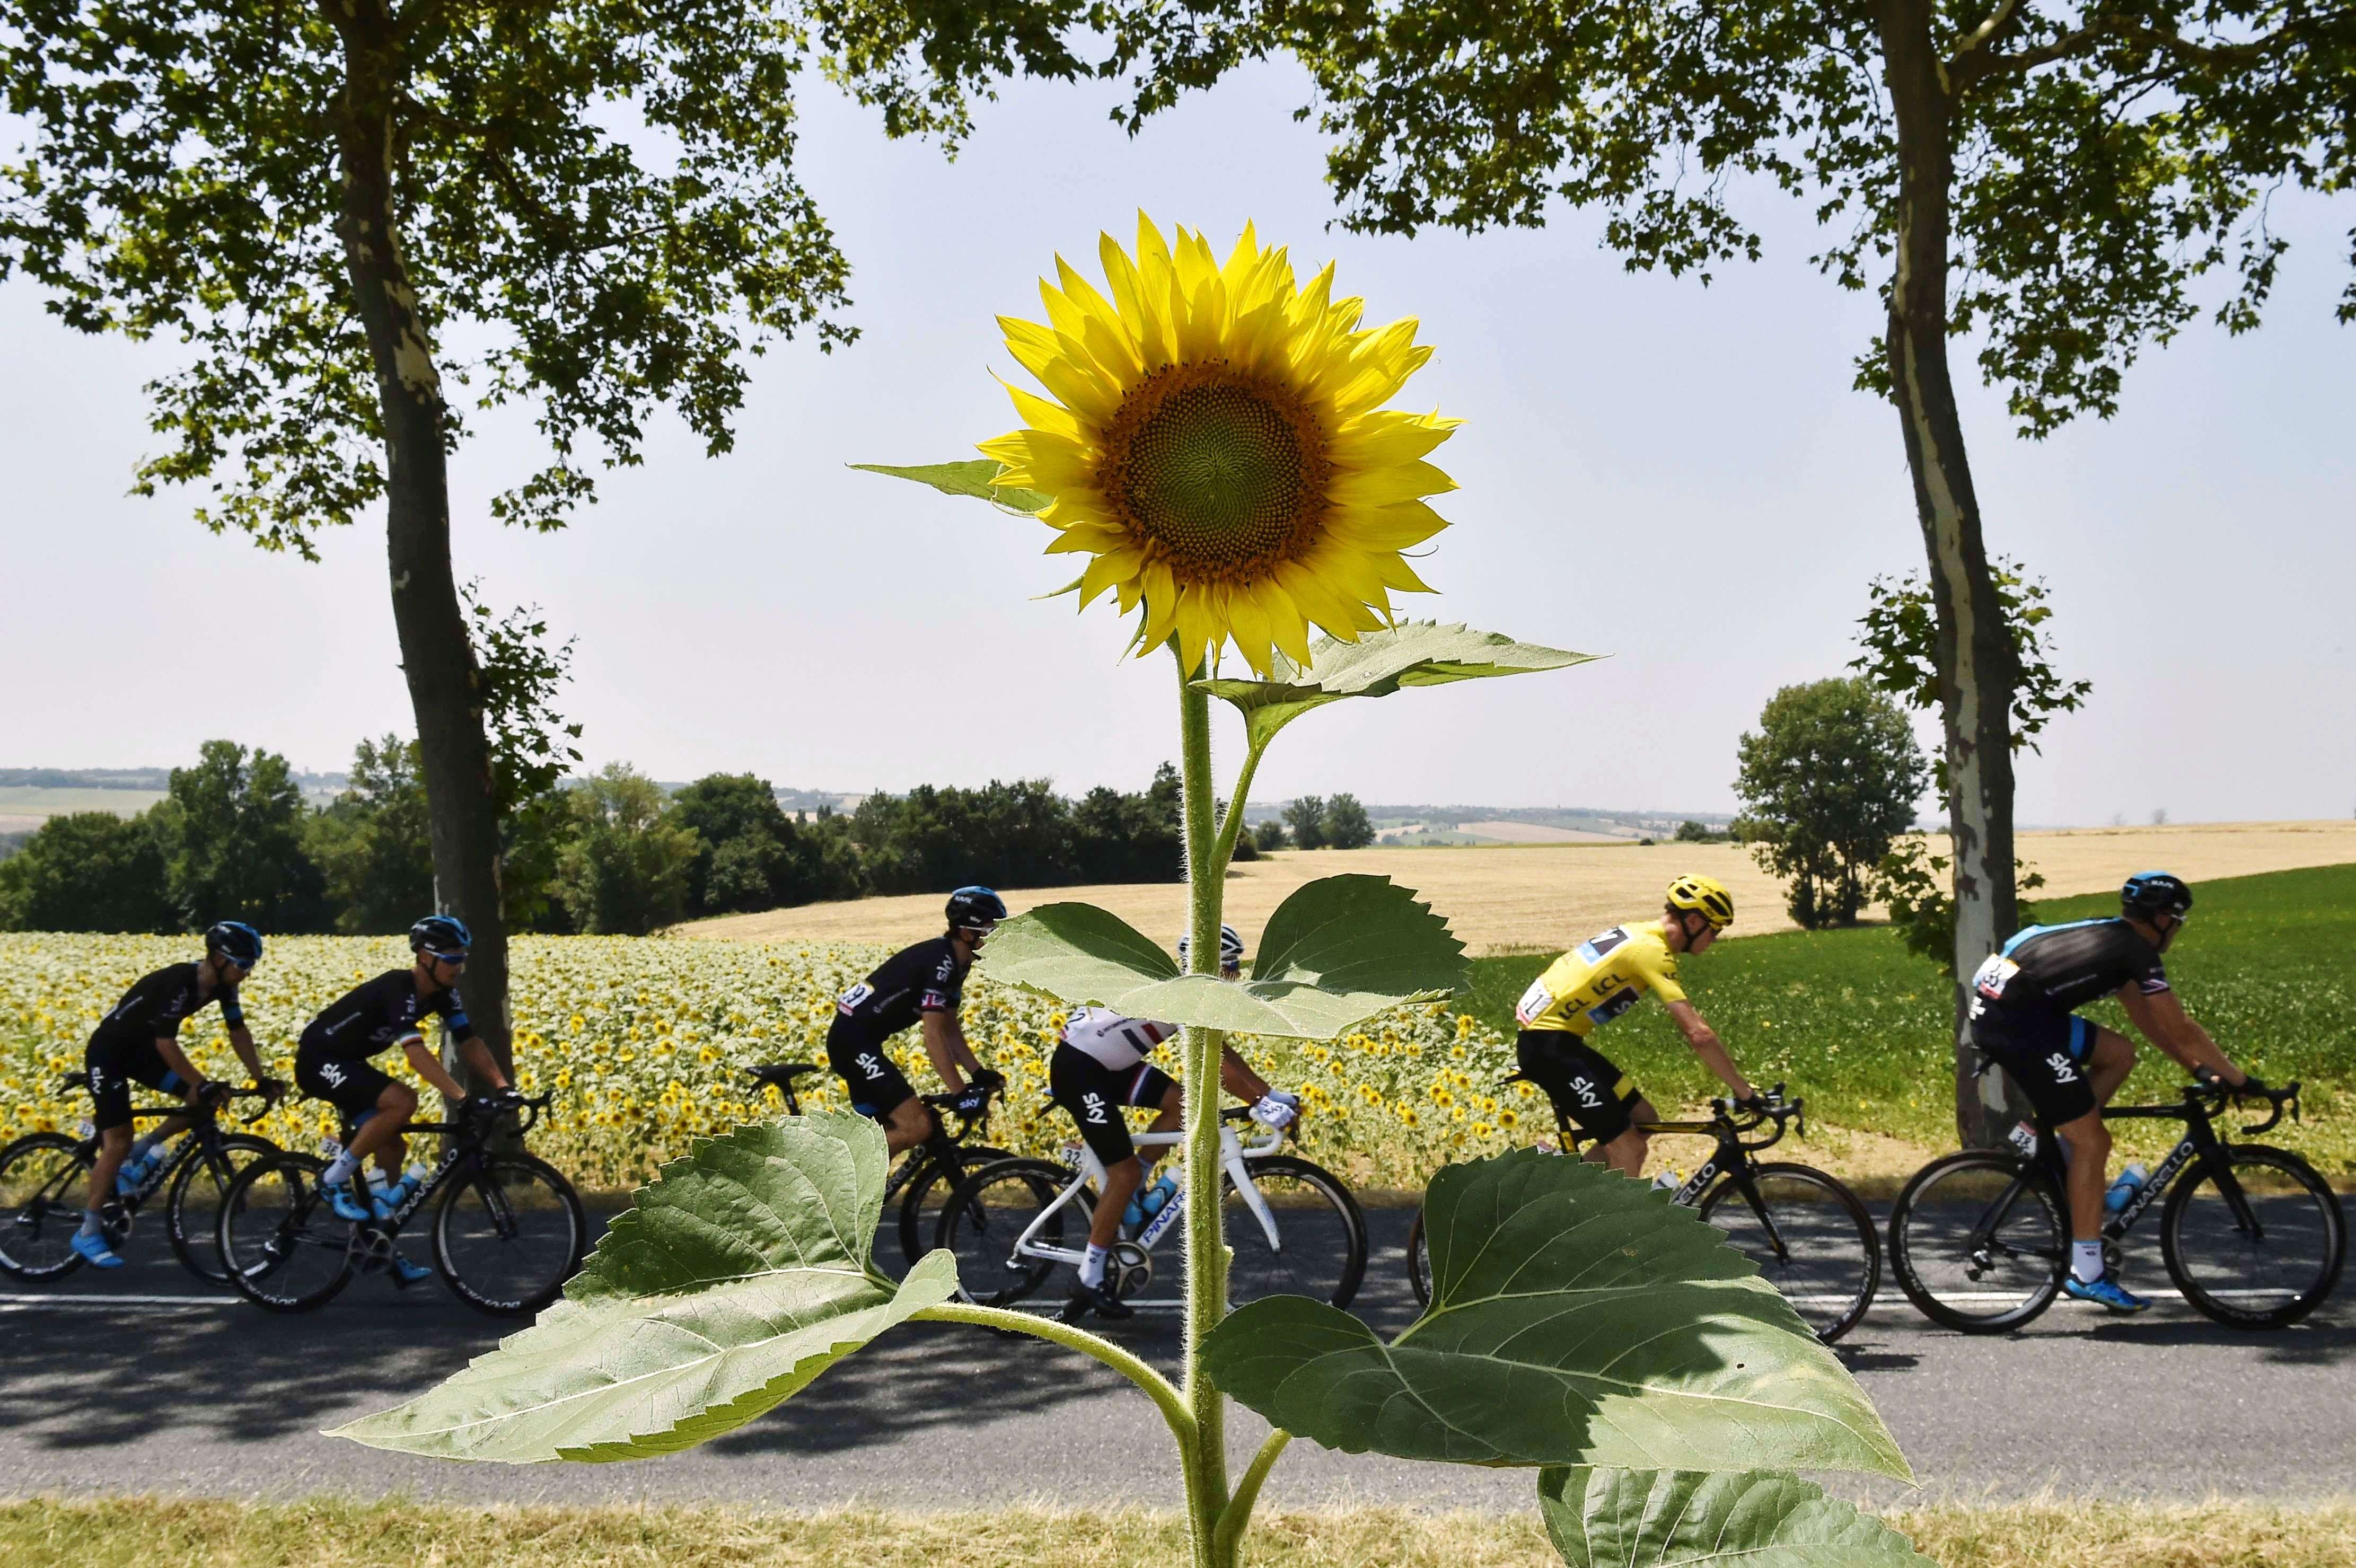 Great Britain's Christopher Froome rides in the pack with his teammates of the Great Britain's Sky cycling team, past a sunflowers field during the 198.5 km thirteenth stage of the 102nd edition of the Tour de France cycling race, between Muret and Rodez, southern France. (AFP/ Jeff Pachoud)